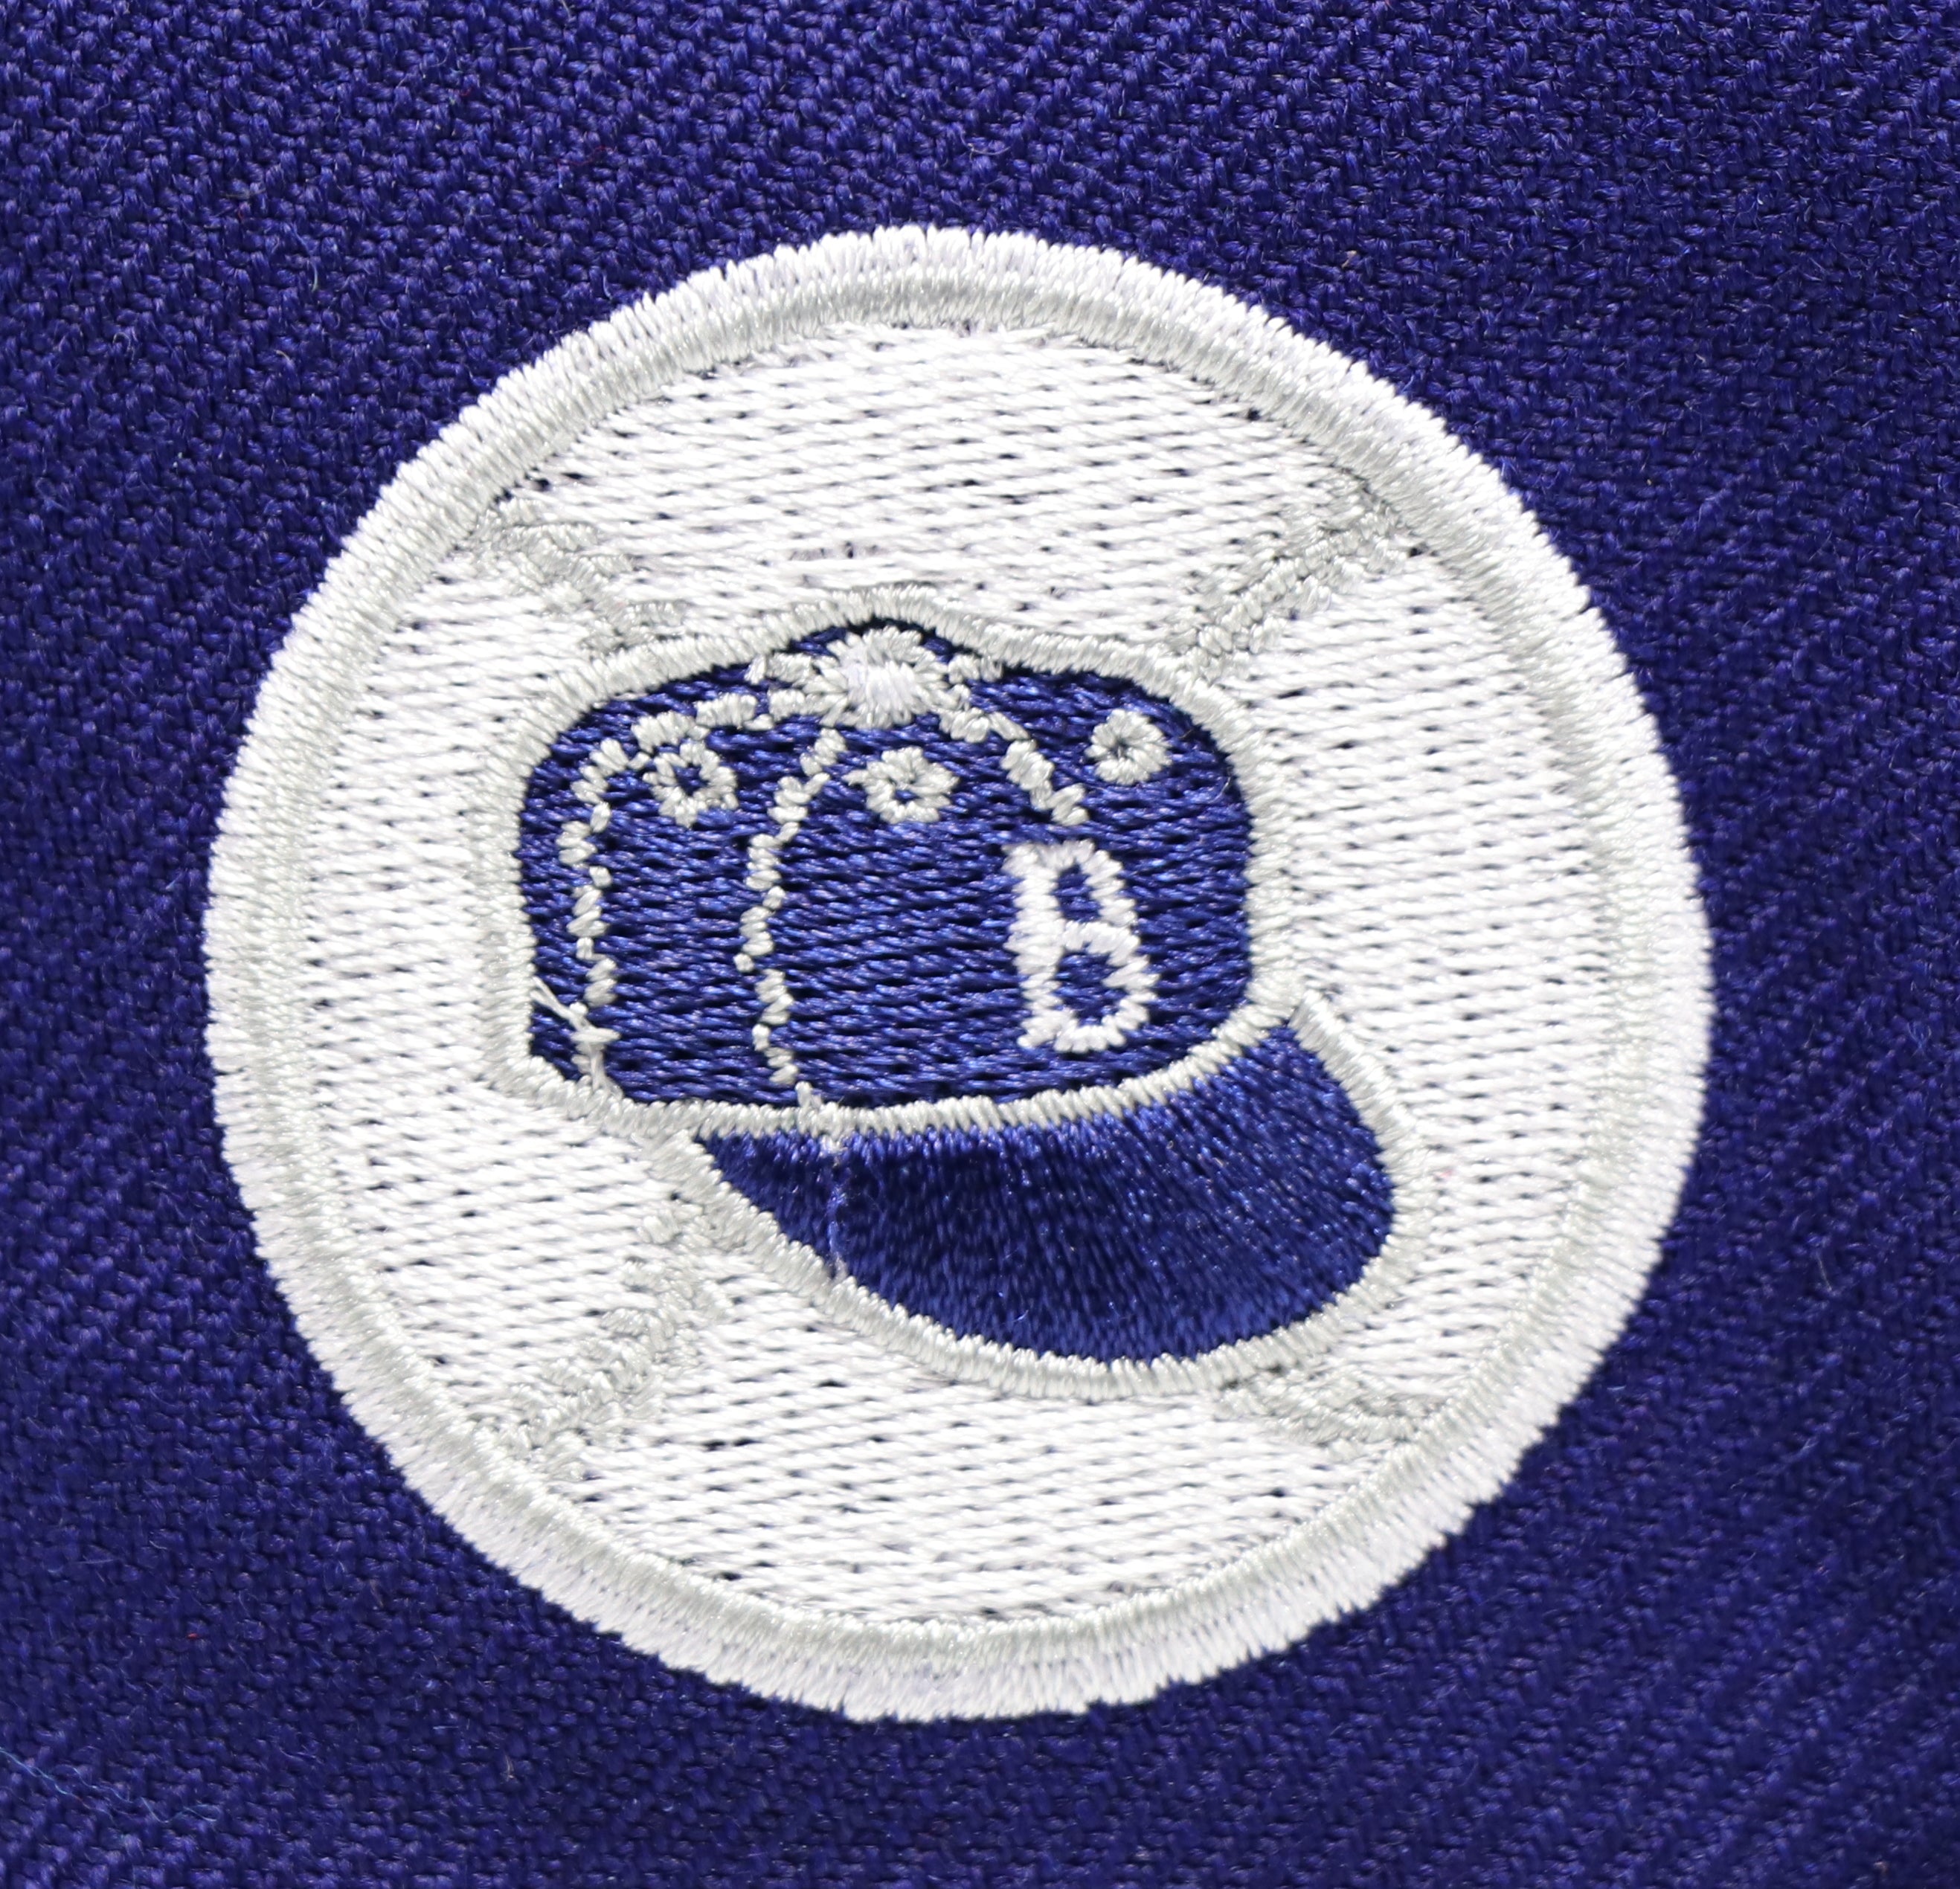 BROOKLYN DODGERS (BK DODGERS 1955 "HISTORY") NEW ERA 59FIFTY FITTED (GREEN UNDER VISOR) WITH PIN